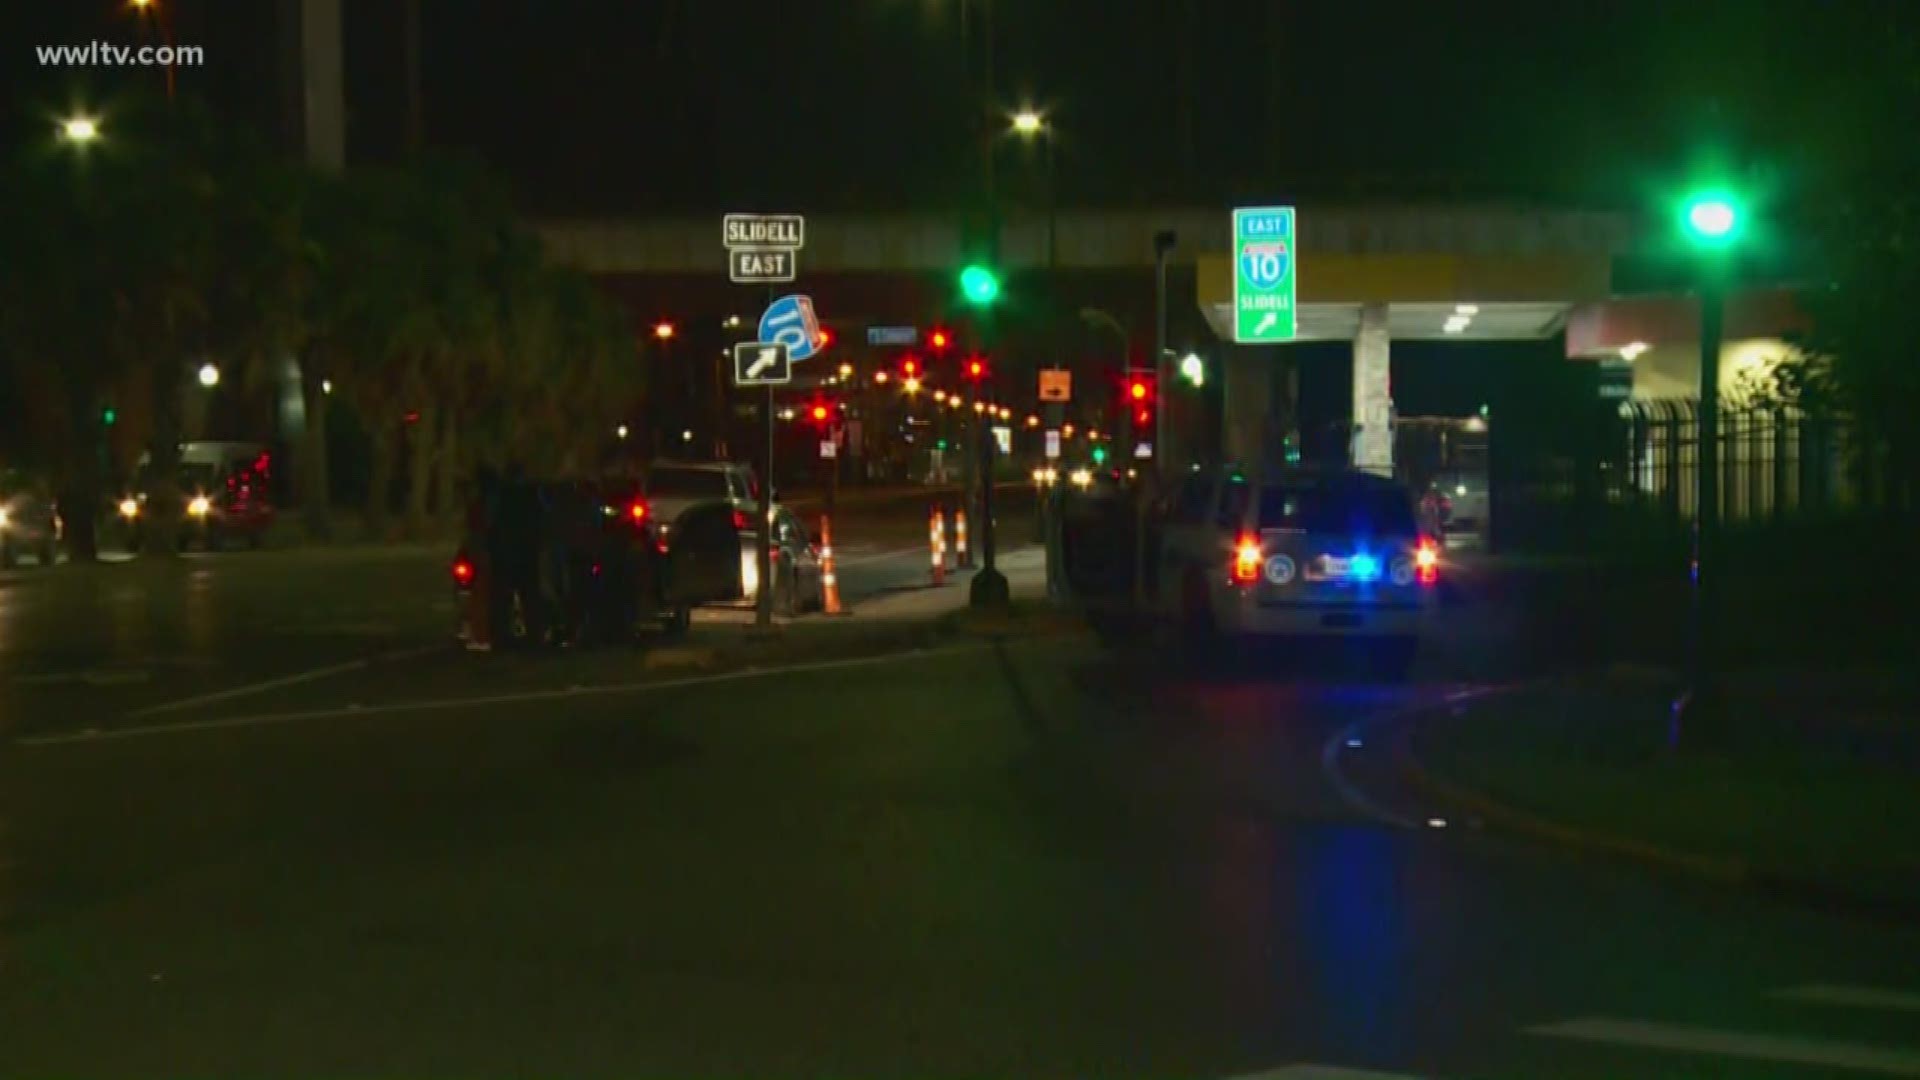 The New Orleans Police Department said the shooting happened around 2 a.m. on I-10 east near Orleans Avenue.